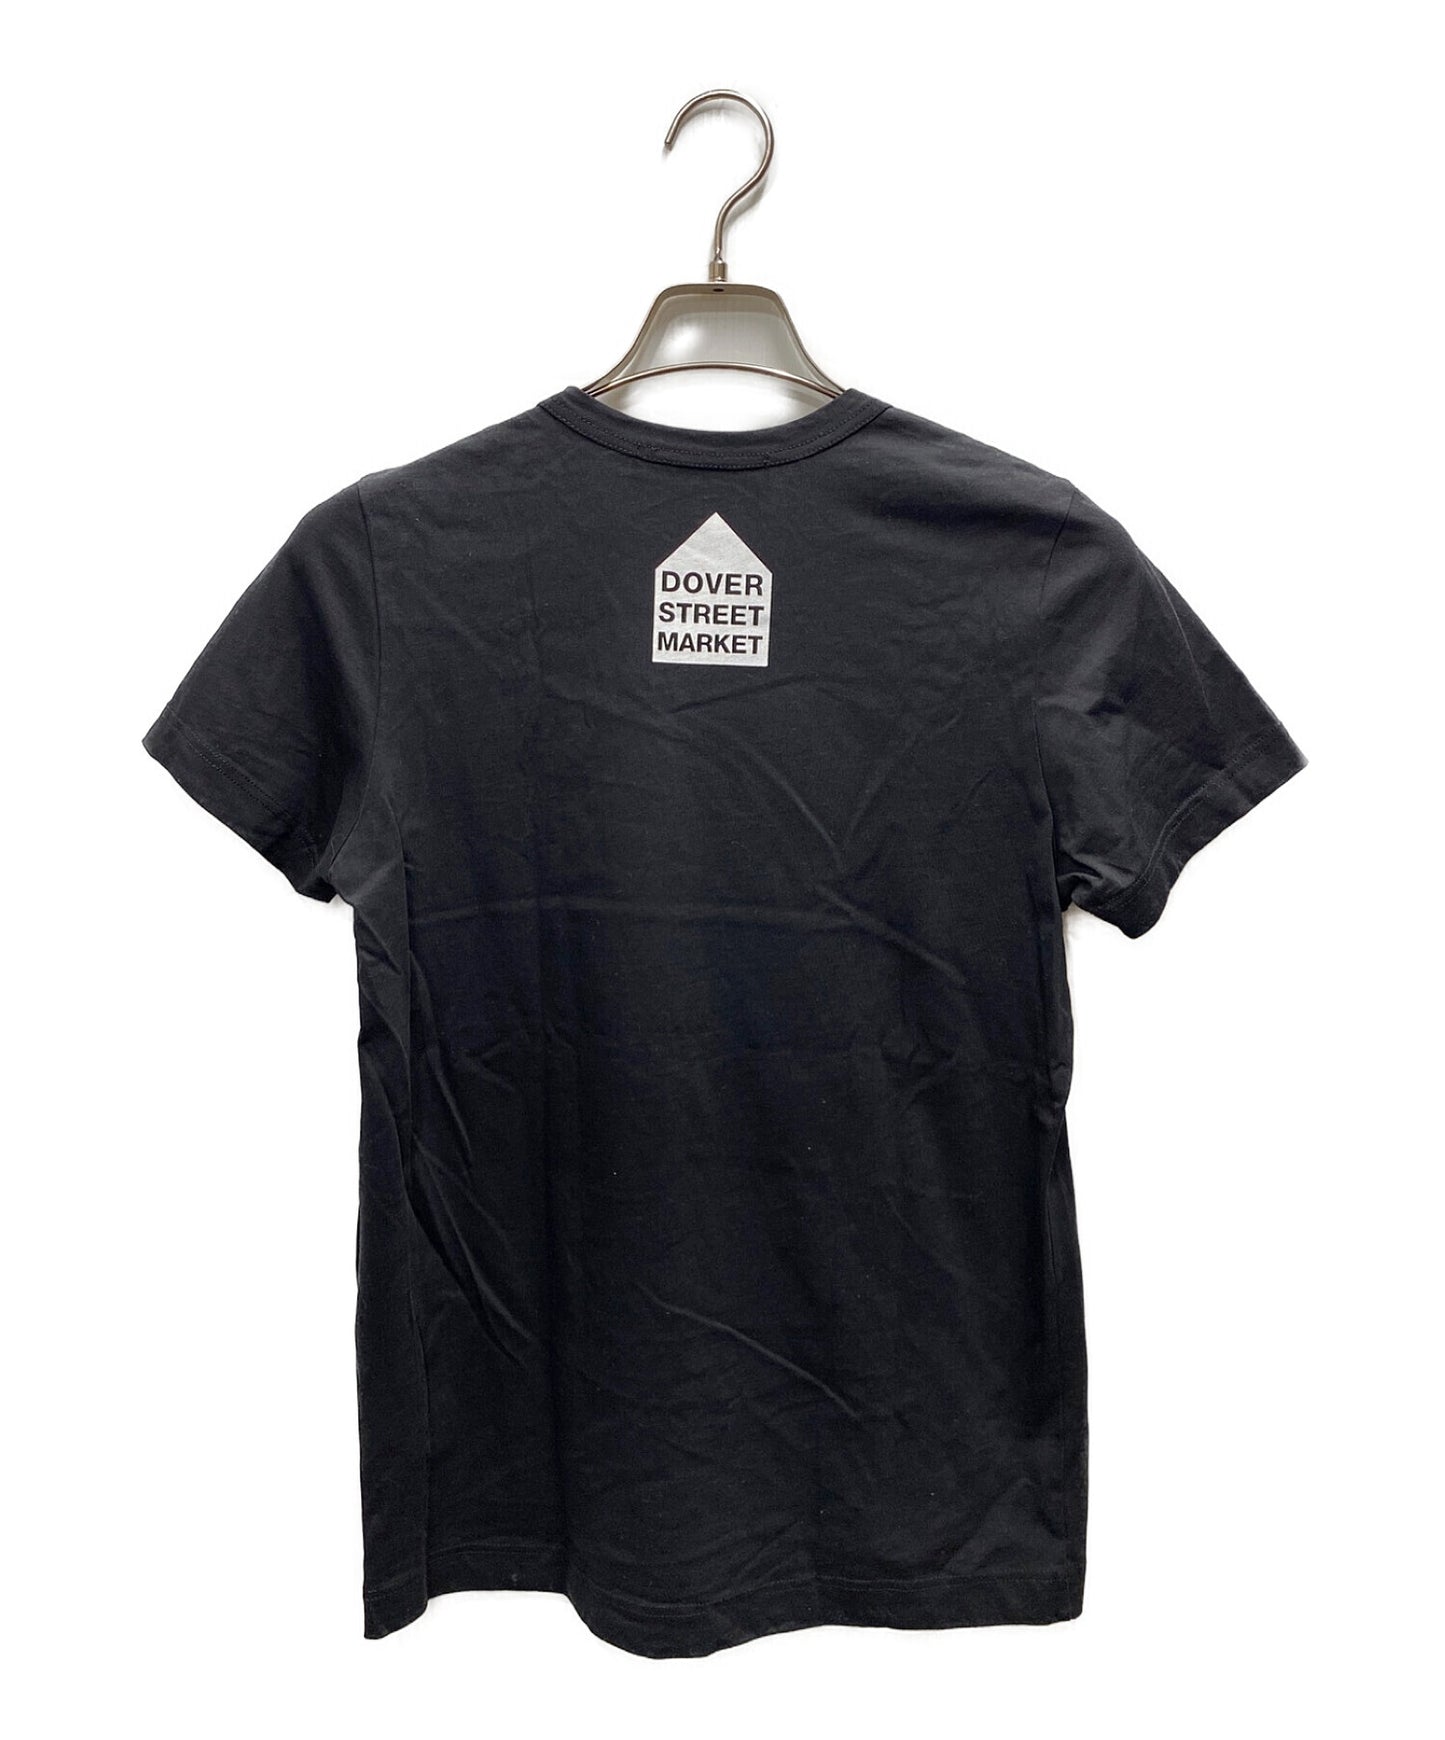 [Pre-owned] COMME des GARCONS DOVER STREET MARKET limited collaboration T-shirt ZI-T002-001